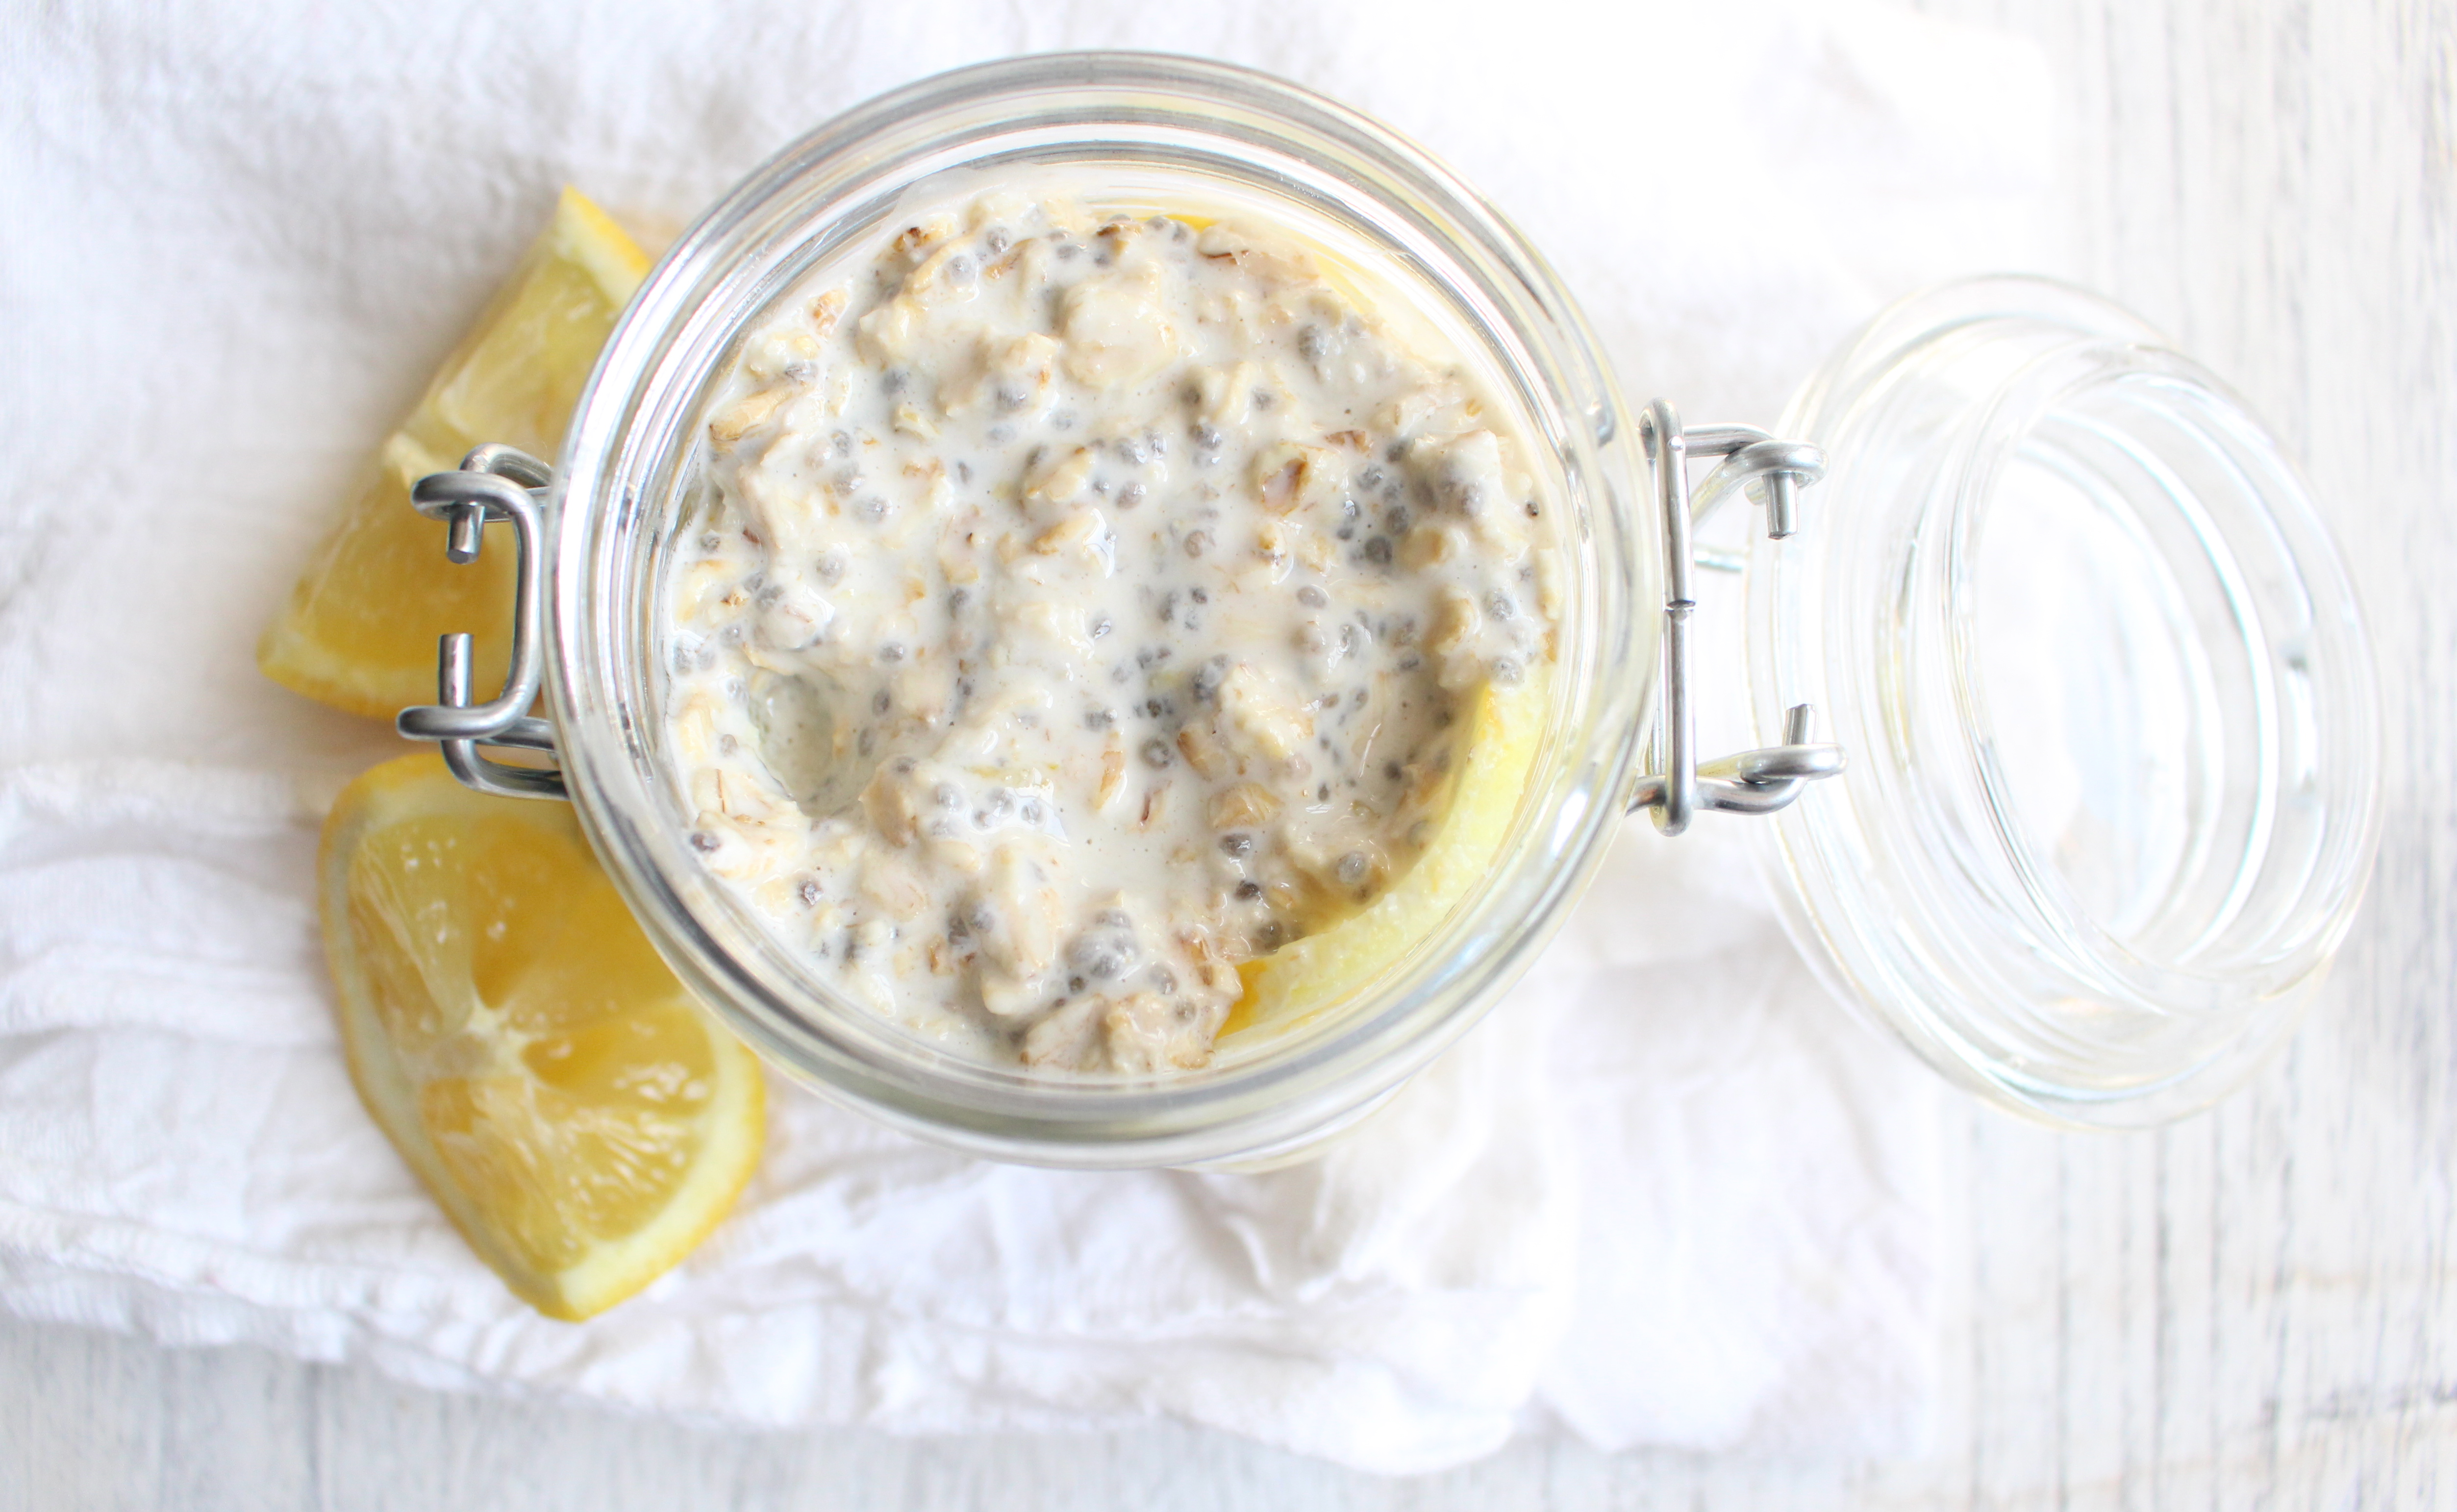 Lemon "Poppy" Overnight Oats - just like your favorite muffin! A healthy breakfast you can throw together in less than 5 minutes the night before and grab and go in the AM!